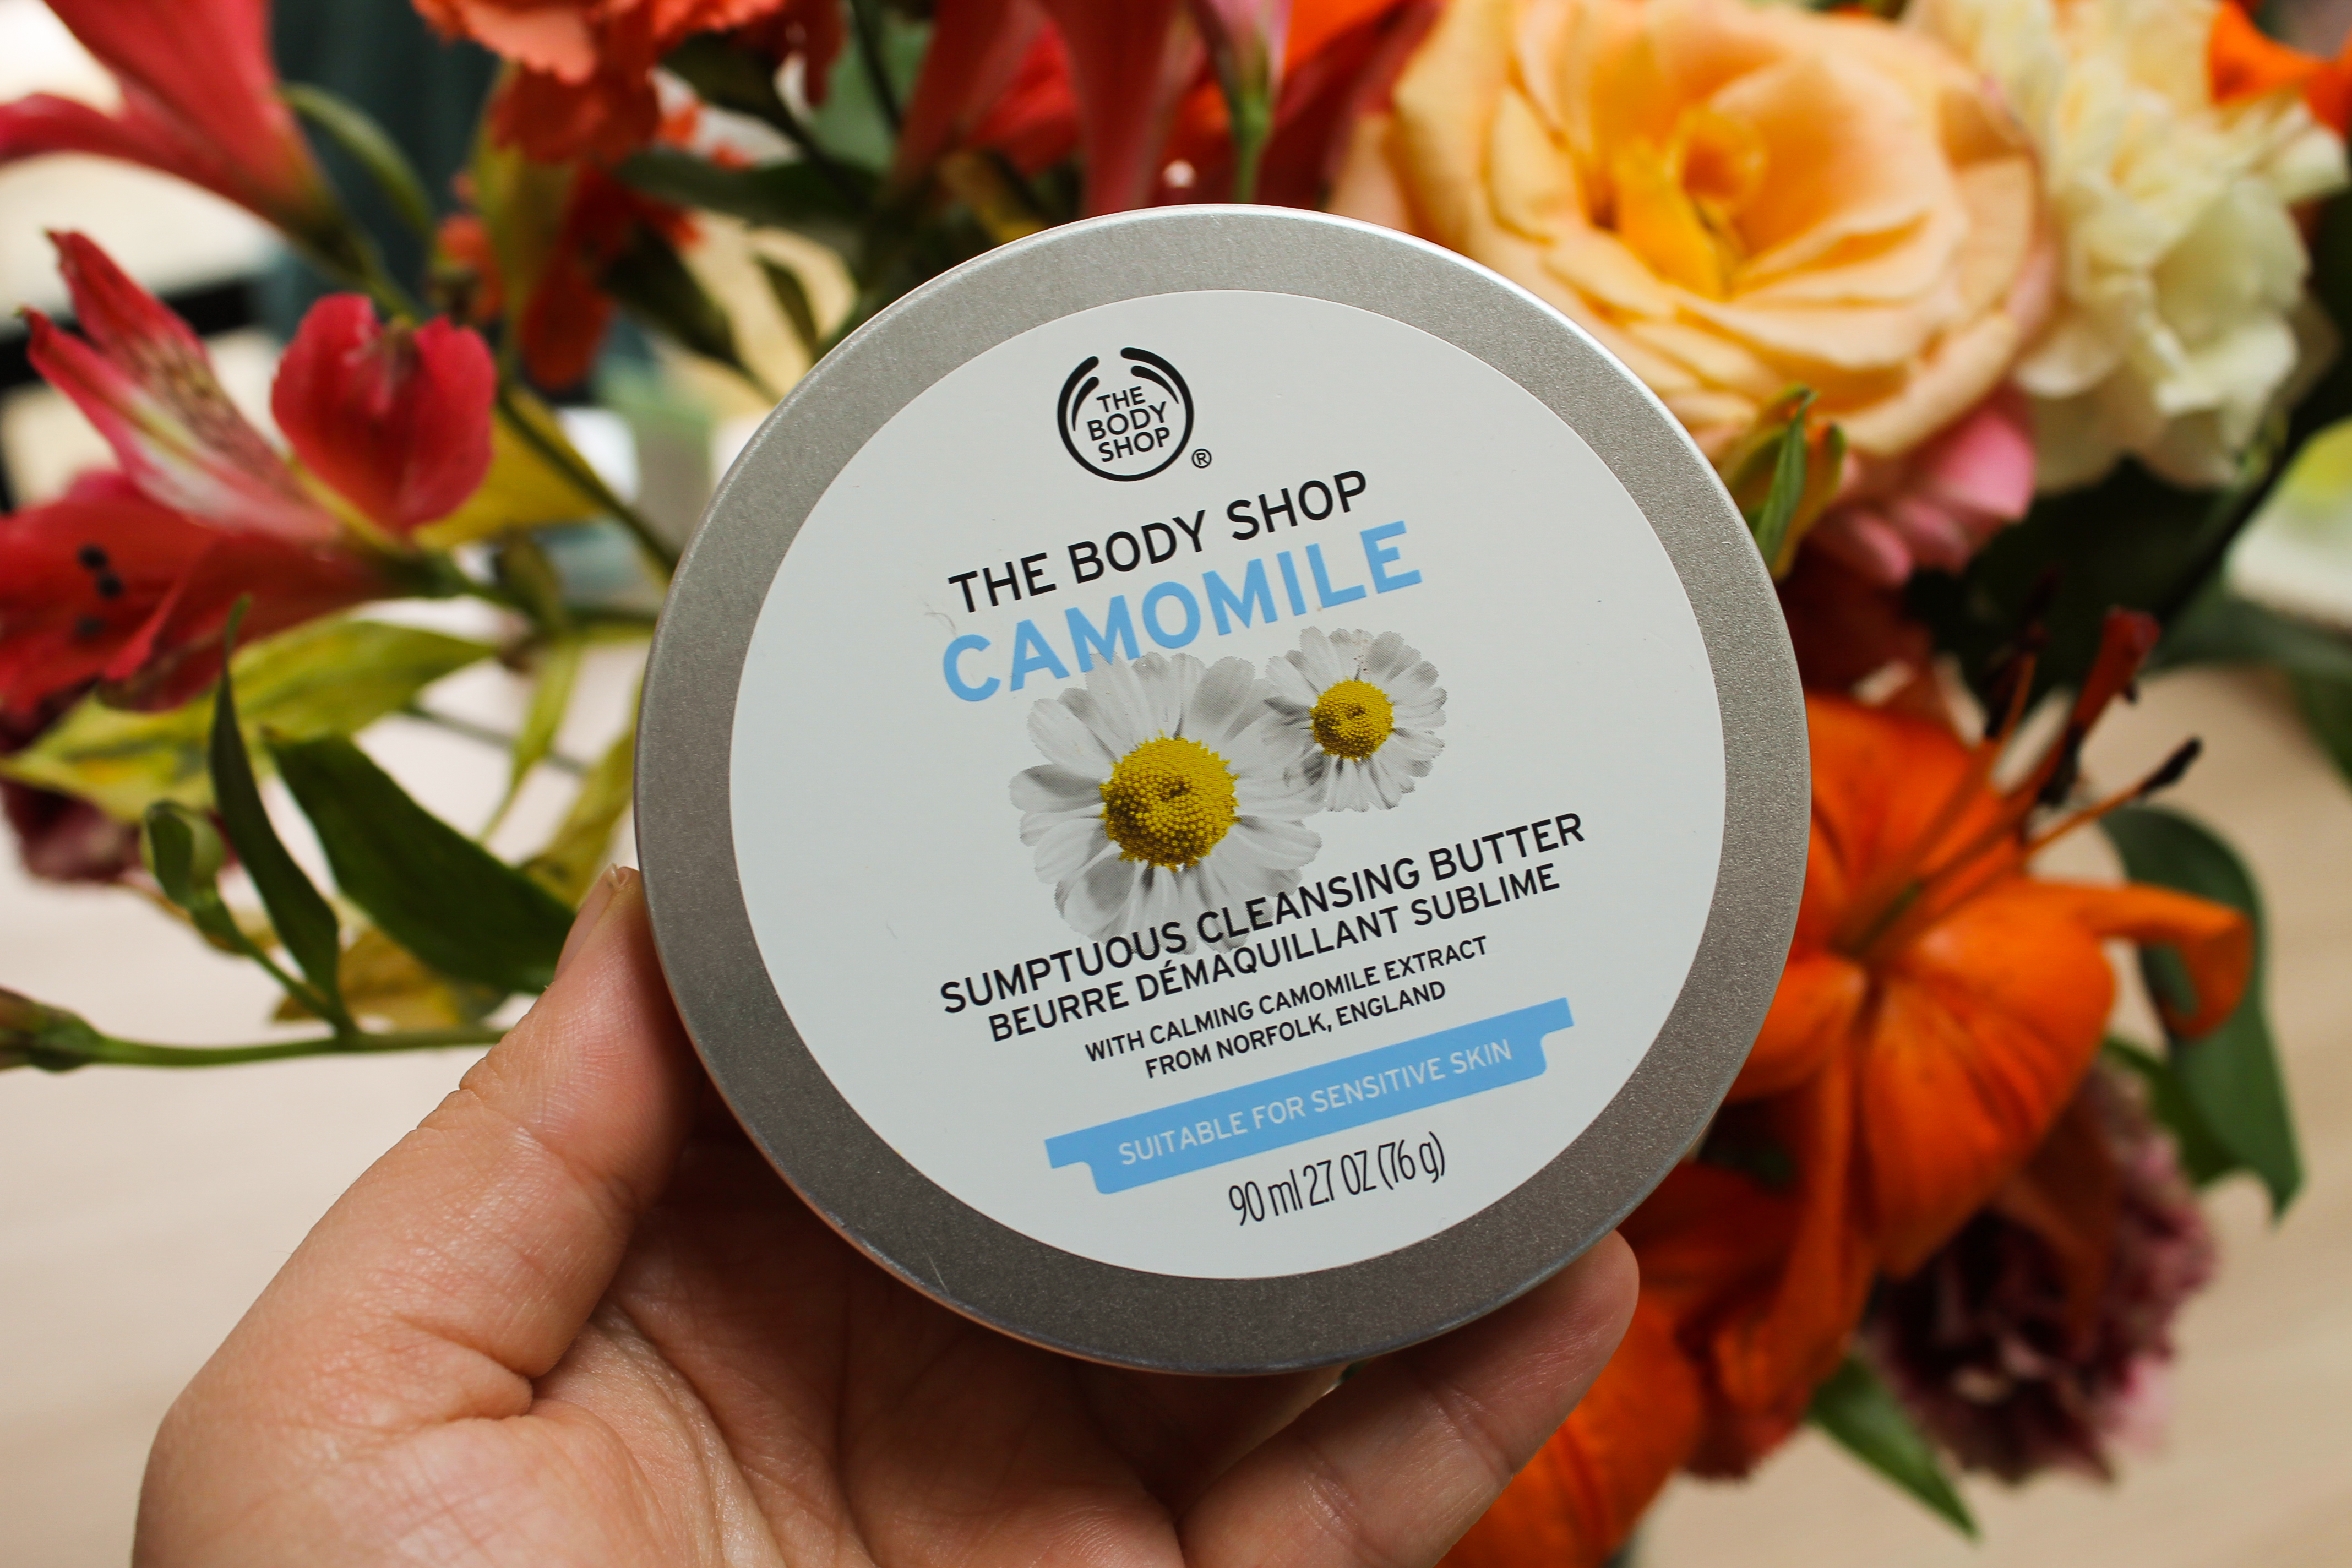 Tin of Camomile Cleansing Butter against a bouquet of flowers